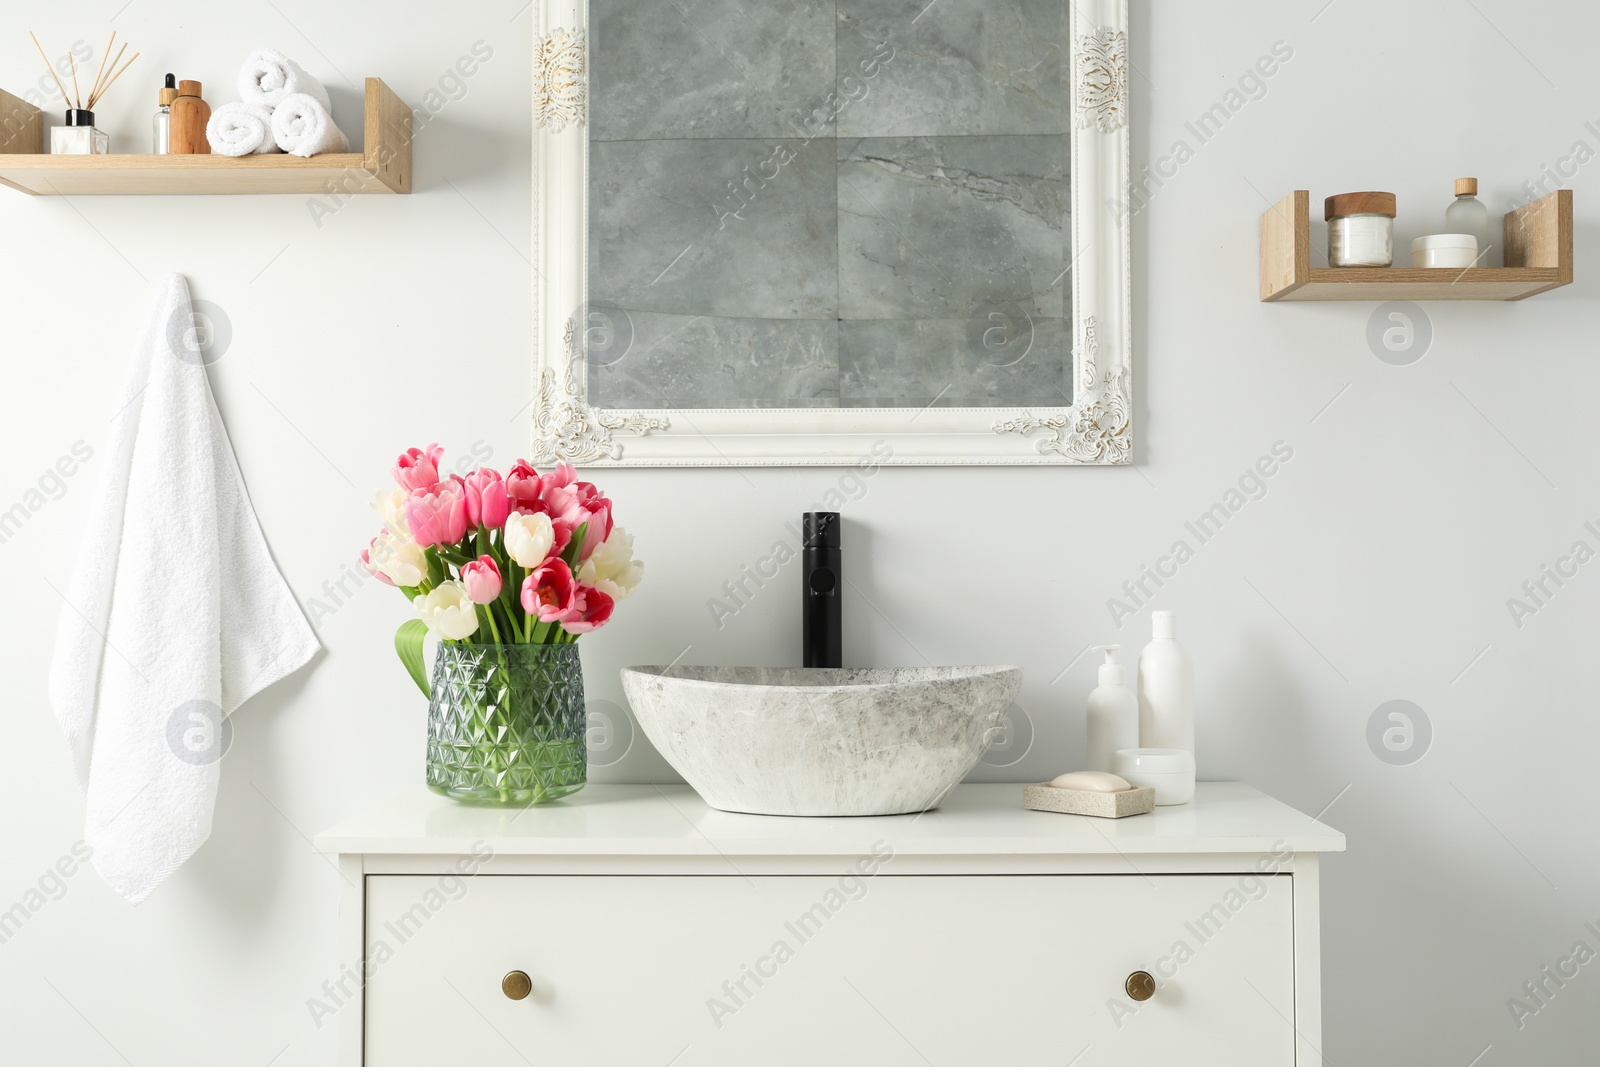 Photo of Vase with beautiful pink tulips and toiletries near sink in bathroom